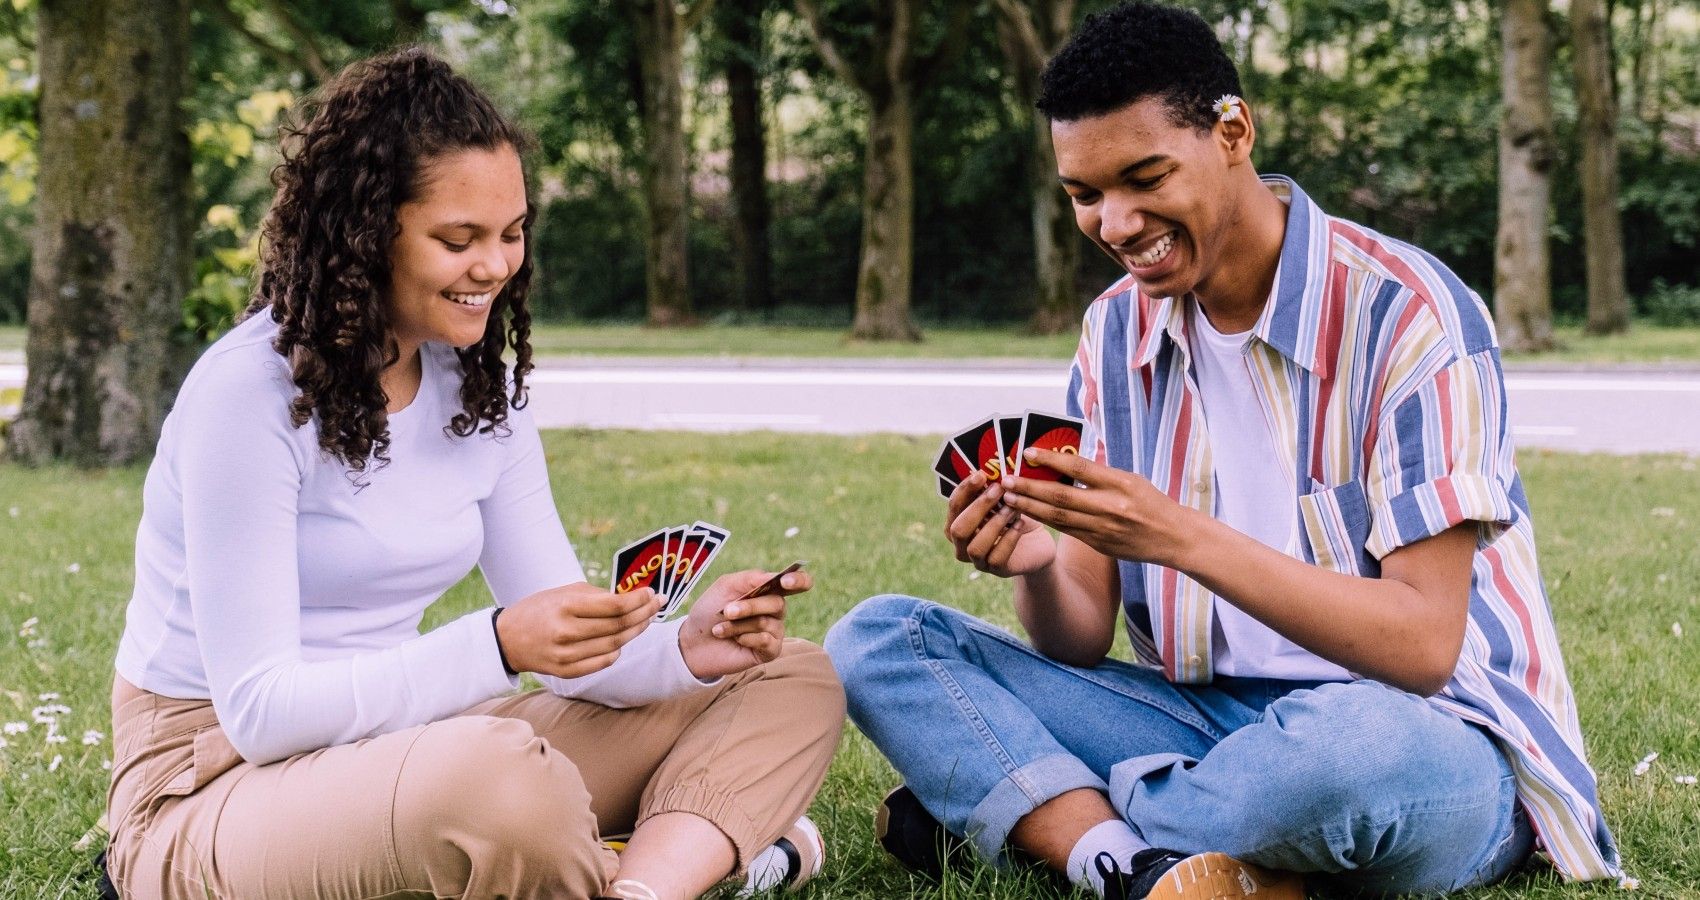 Youth Playing A Card Game Together